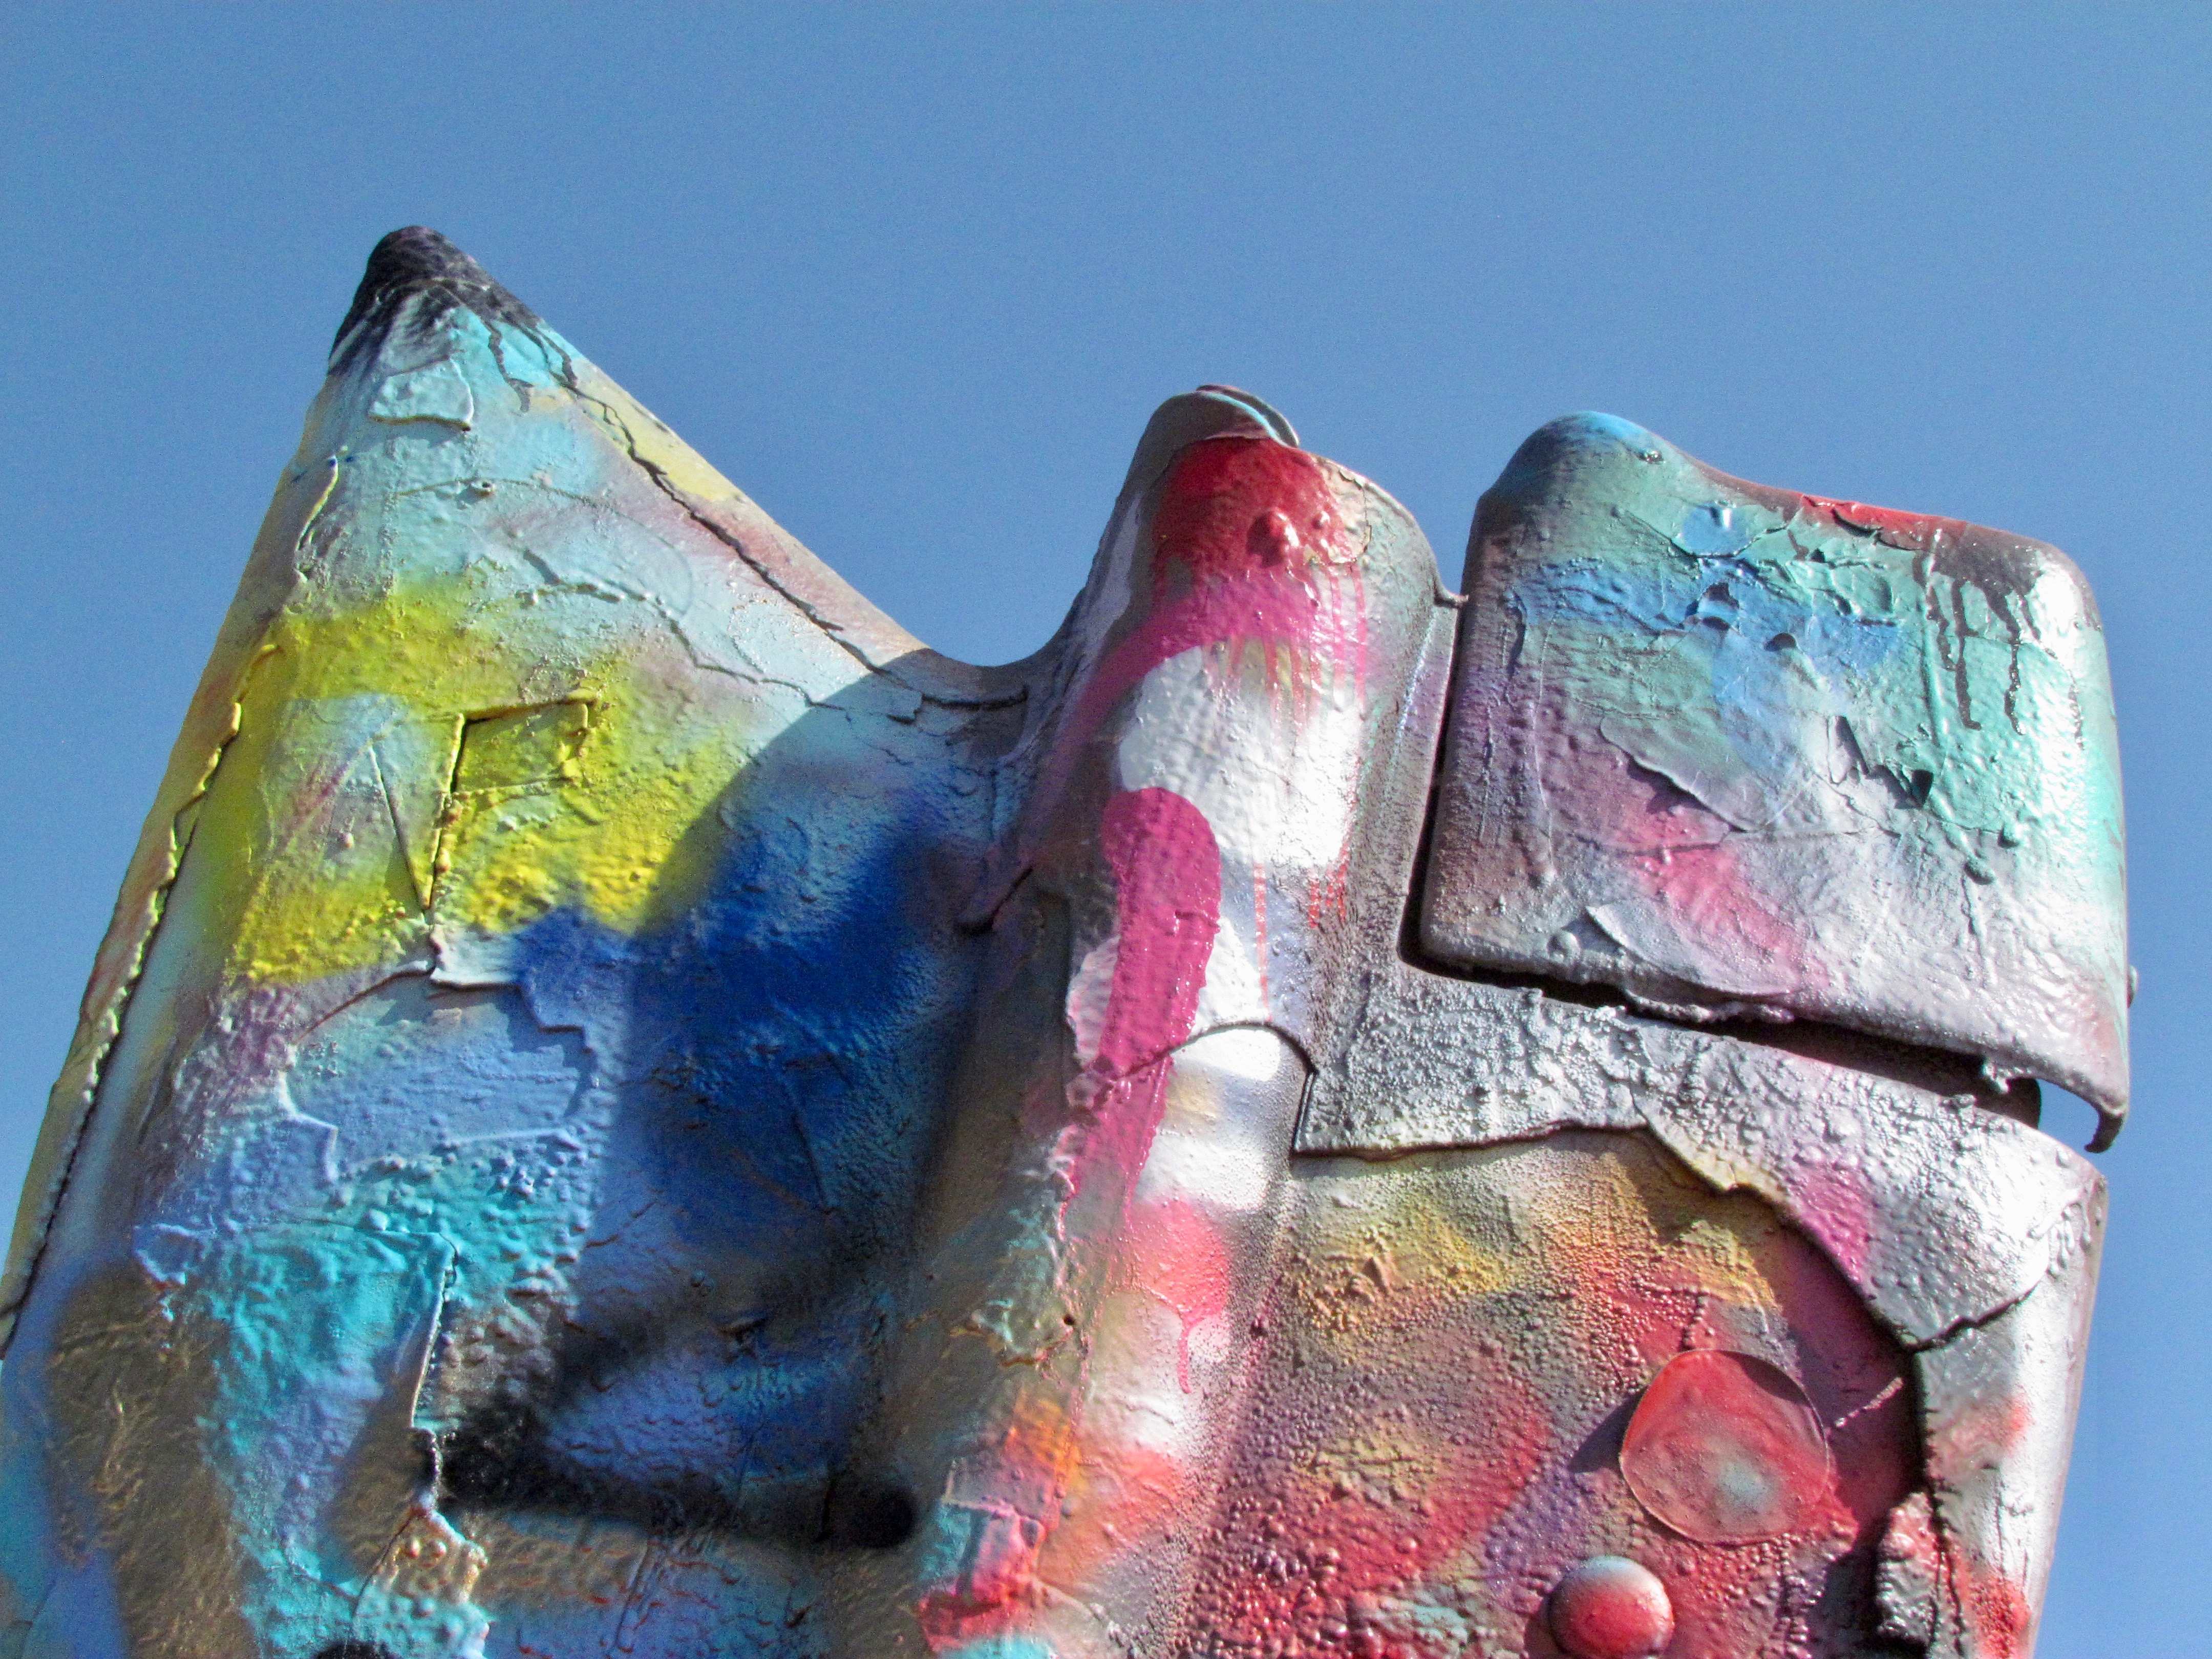 Cadillac Ranch, The evolution of the art at Cadillac Ranch, ClassicCars.com Journal